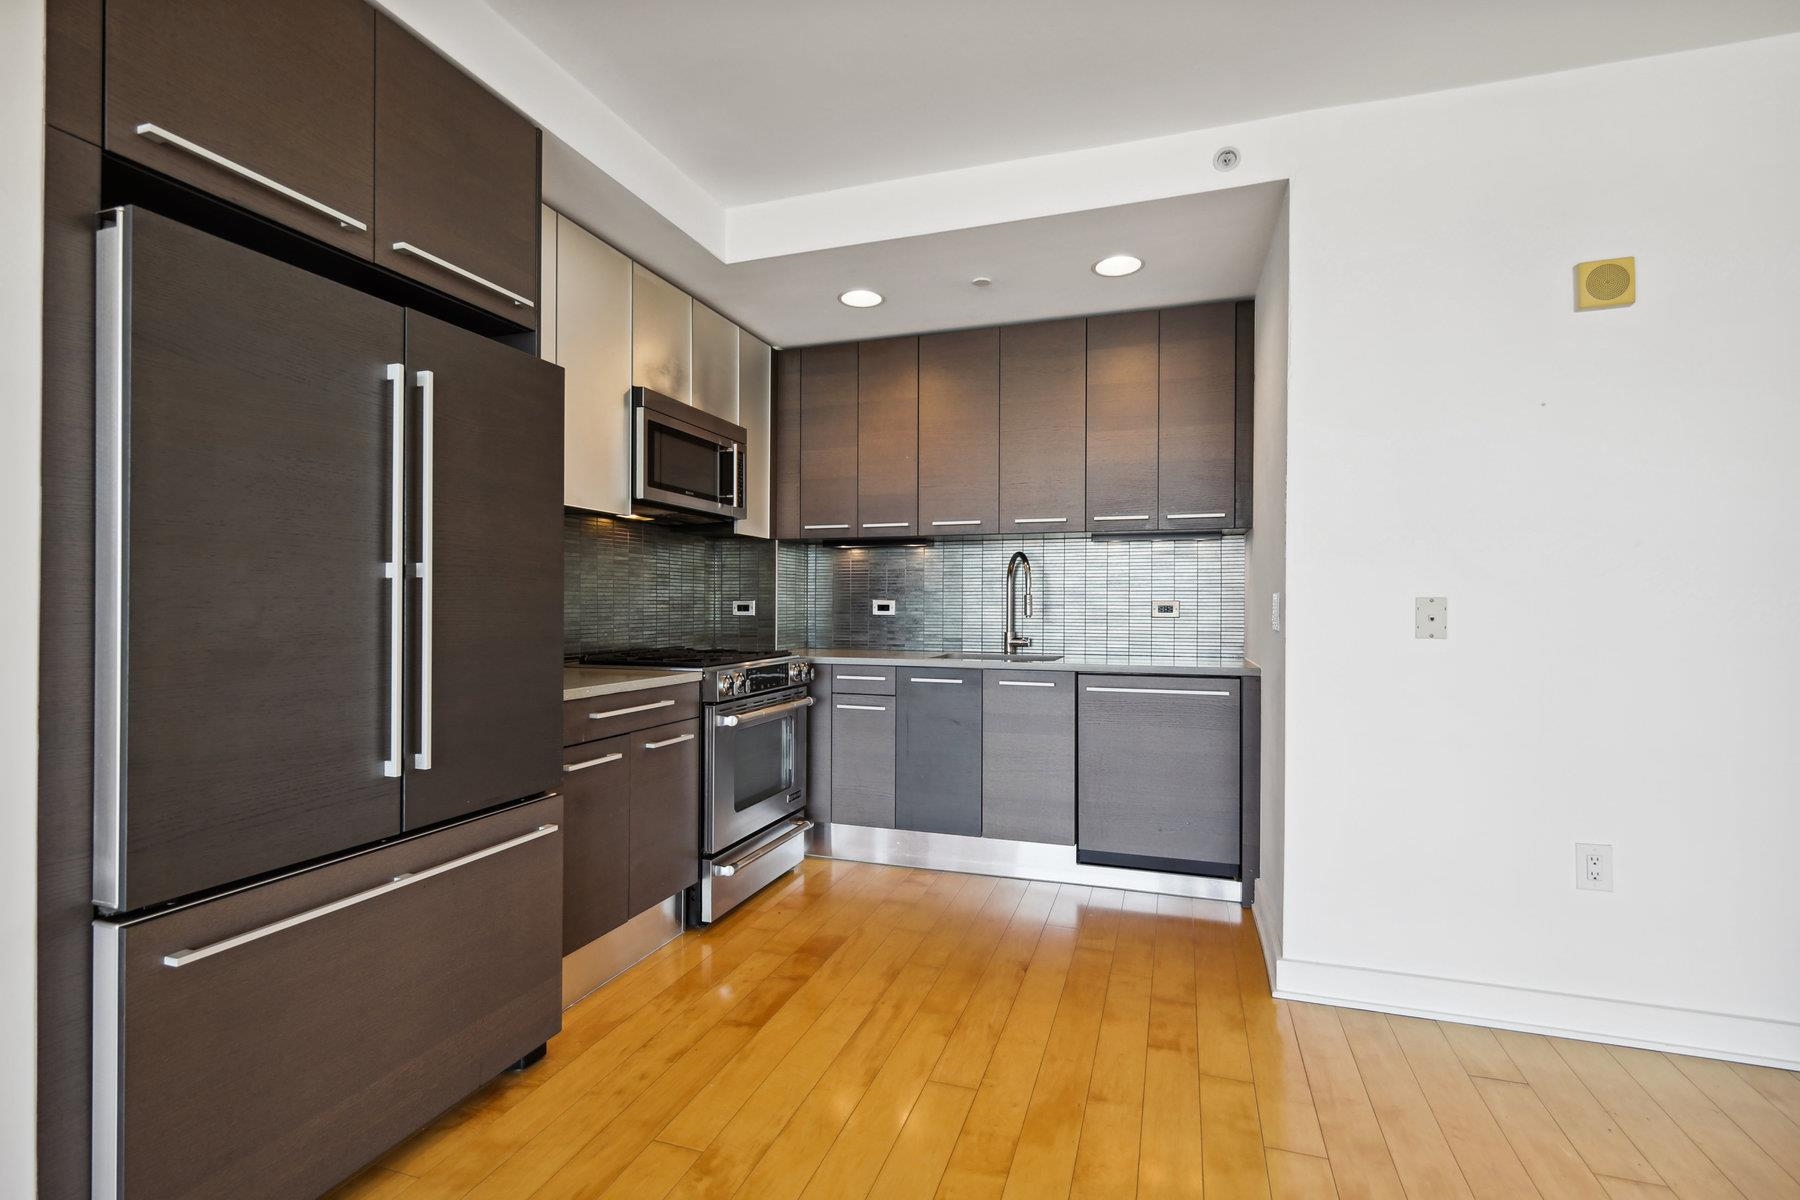 # 240007633 - For Rent in JERSEY CITY - Downtown NJ